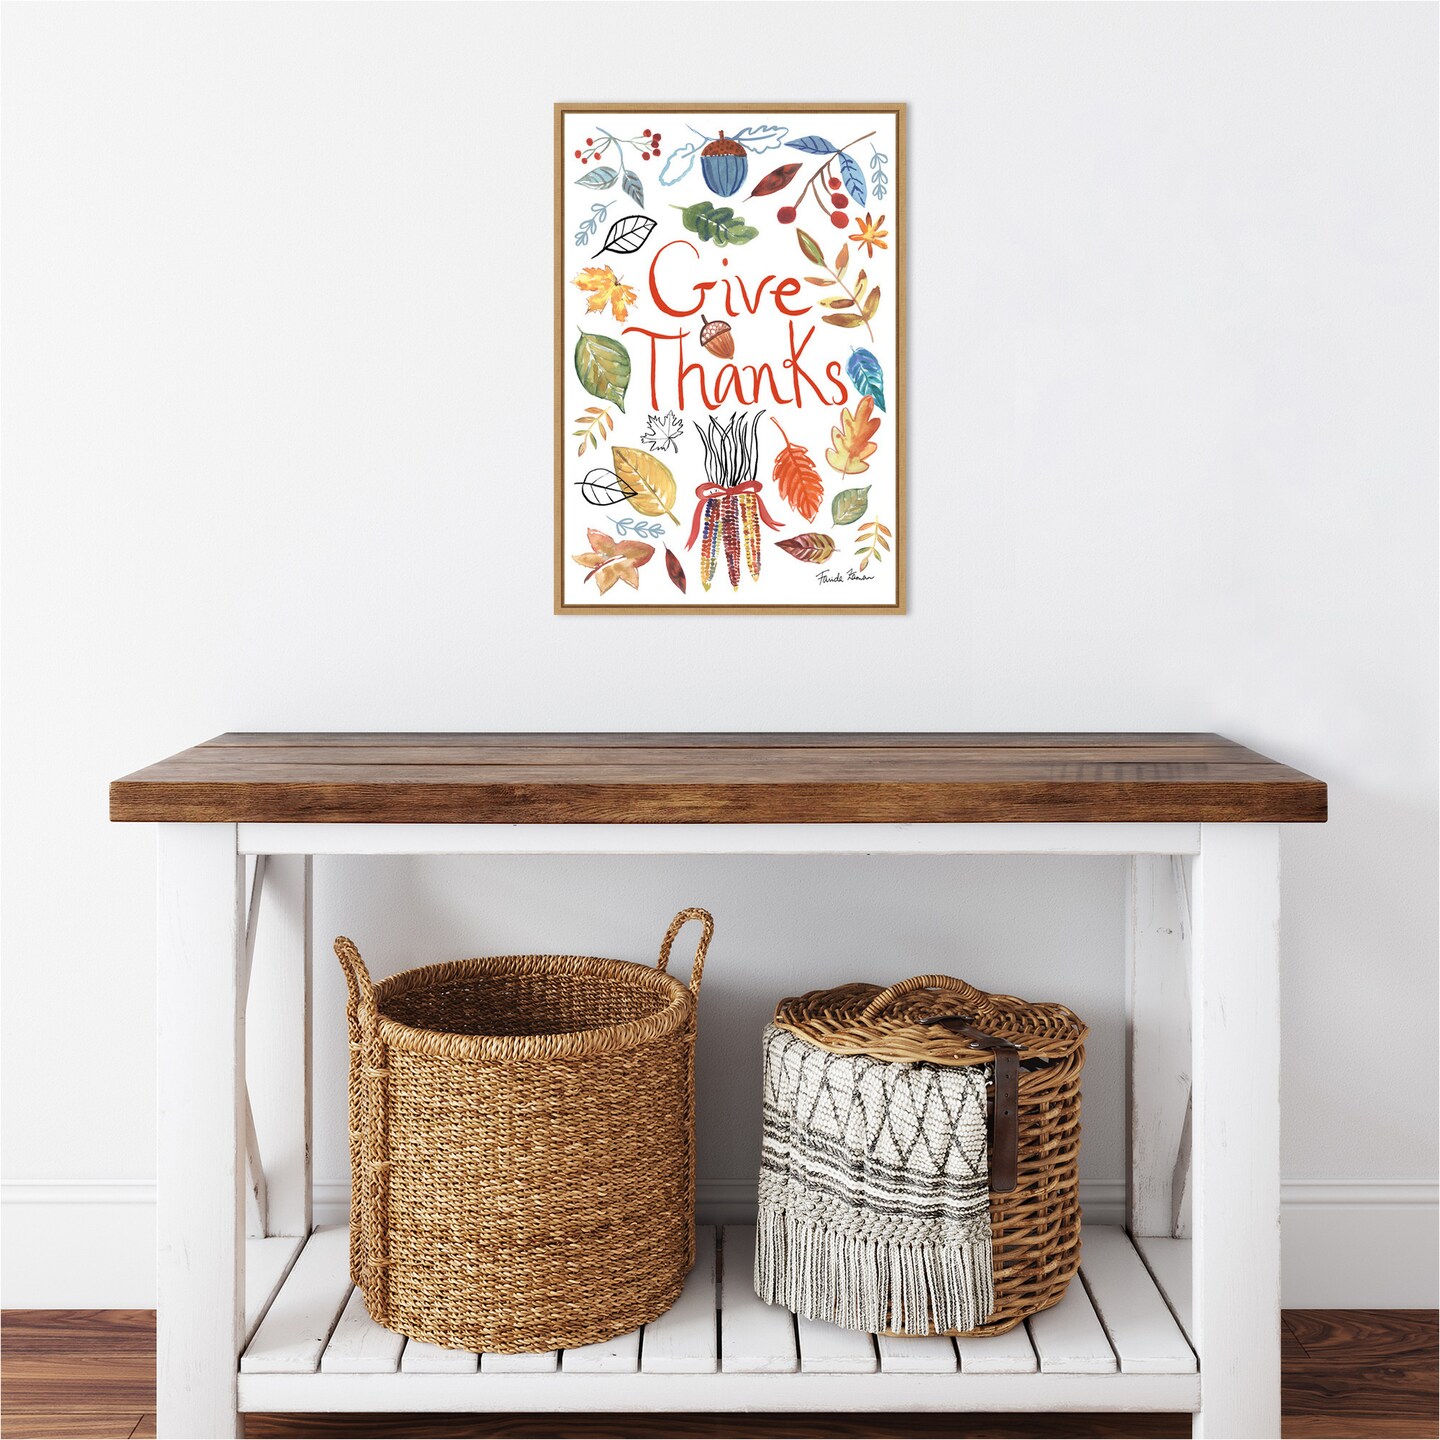 Hello Fall IV by Farida Zaman 16-in. W x 23-in. H. Canvas Wall Art Print Framed in Natural